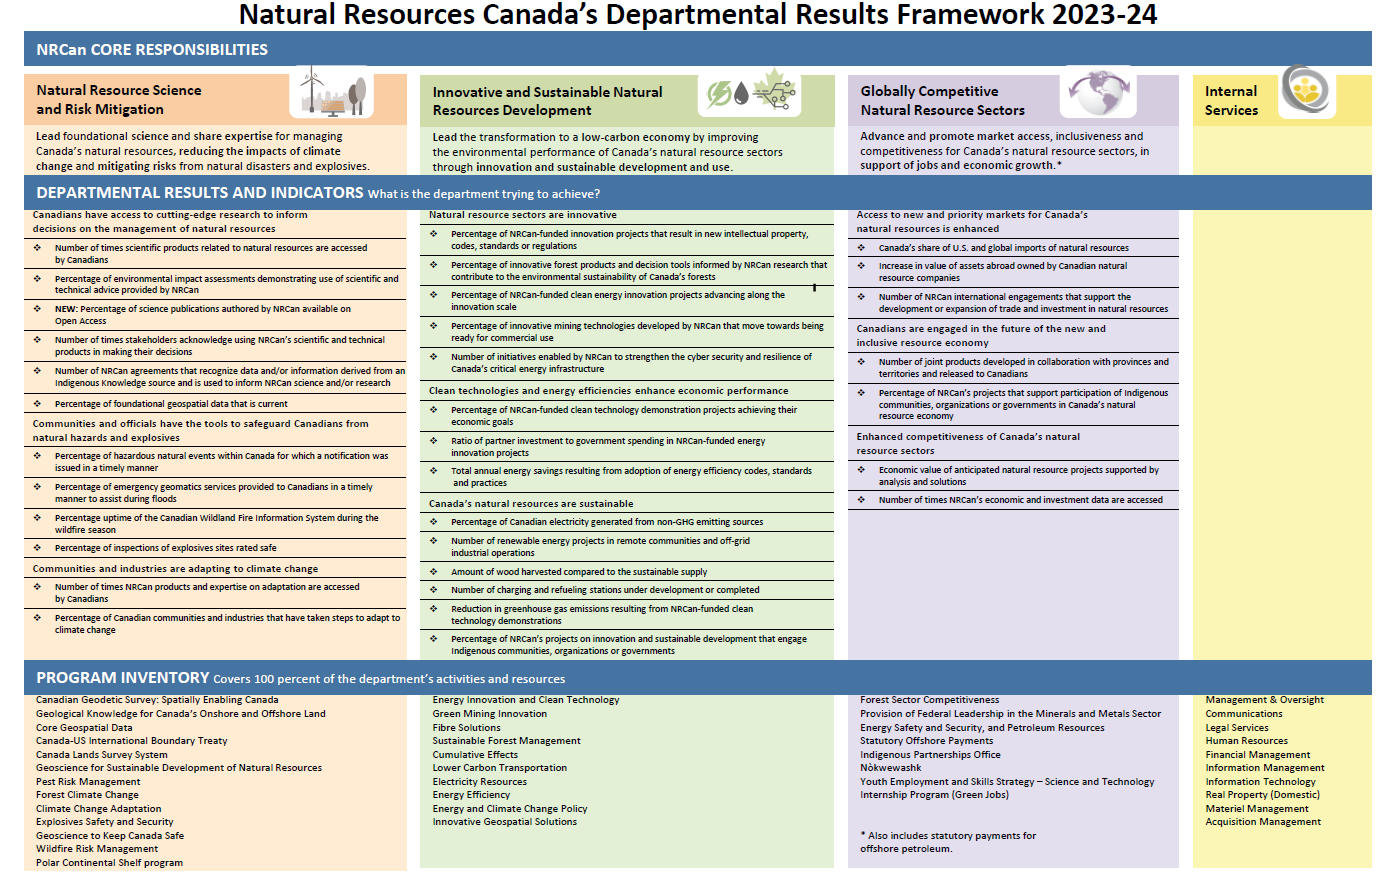 Infographic showing Natural Resources Canada's Departmental Results Frameword for 2023-24